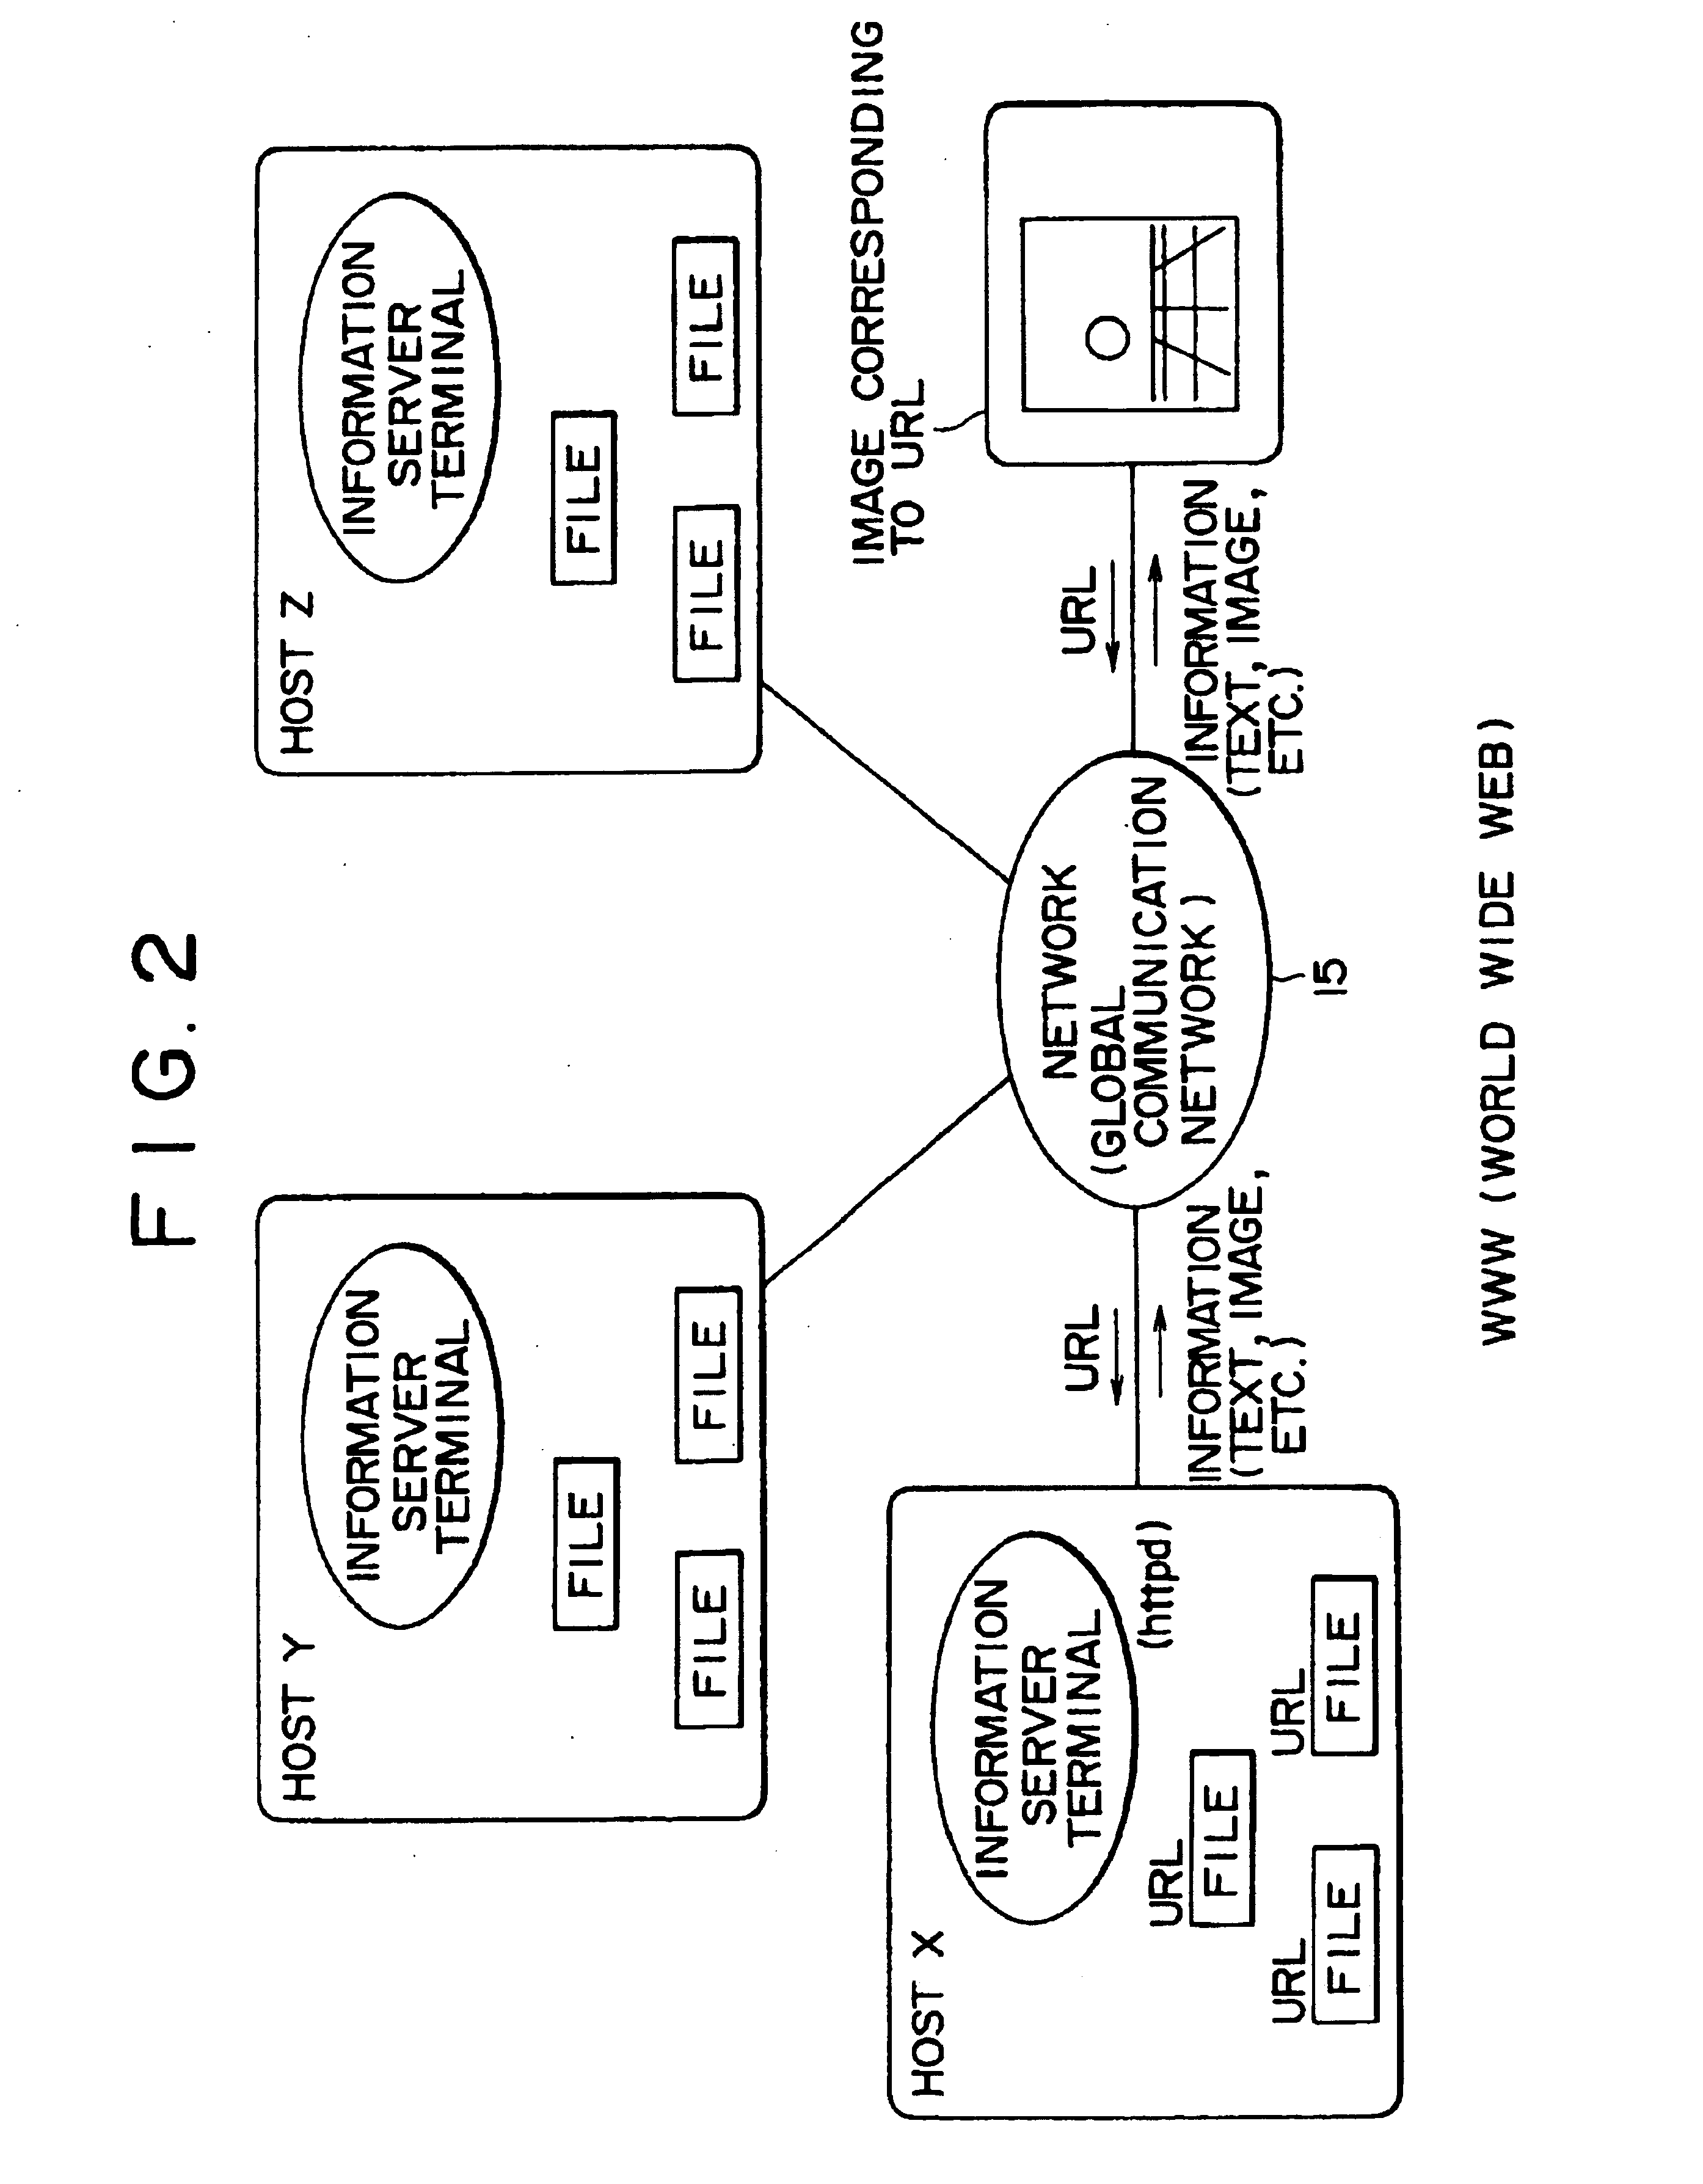 Image display processing apparatus that automatically changes position of sub-window relative to main window depending on distance at watch sub window is commanded to be displayed